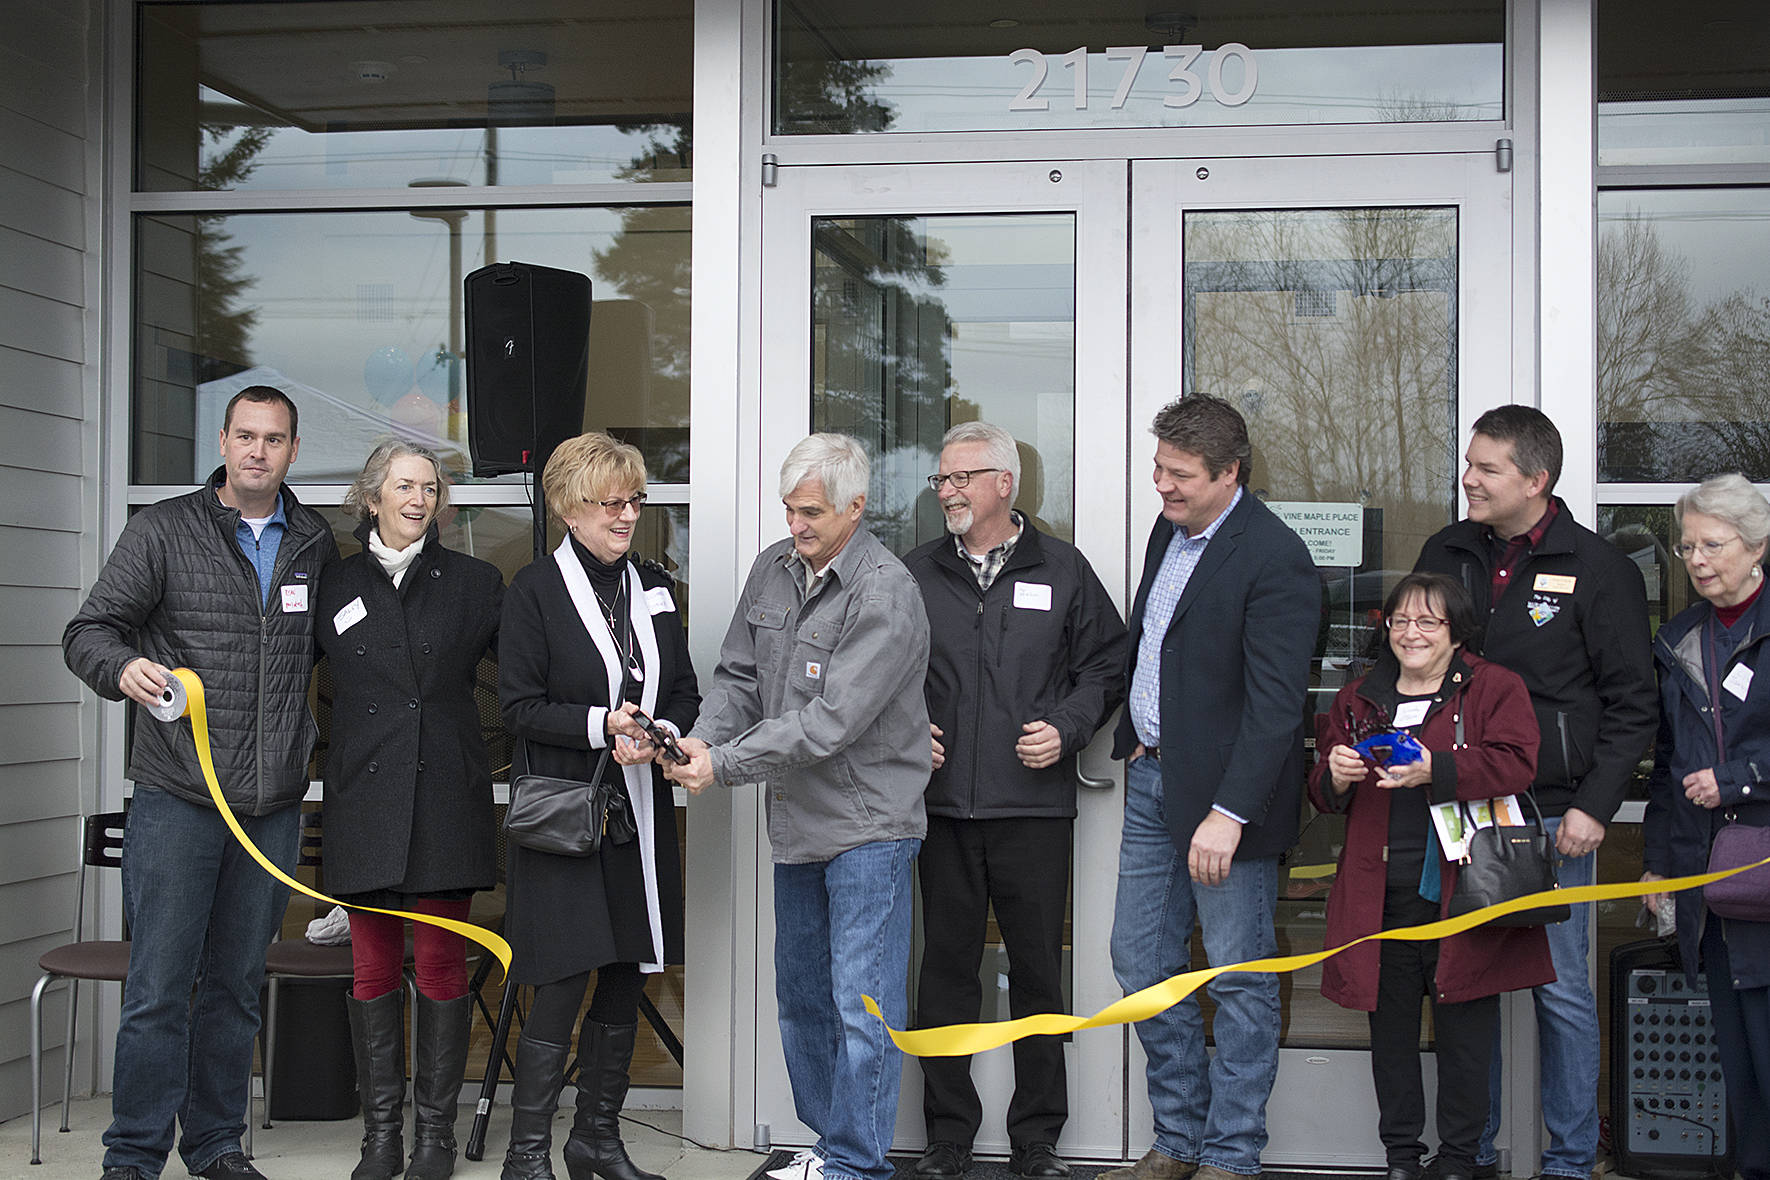 Vine Maple Place opened its doors to its new resource center located in Maple Valley on Dec. 8. To celebrate, there was a ribbon cutting and a tour of the new facility.